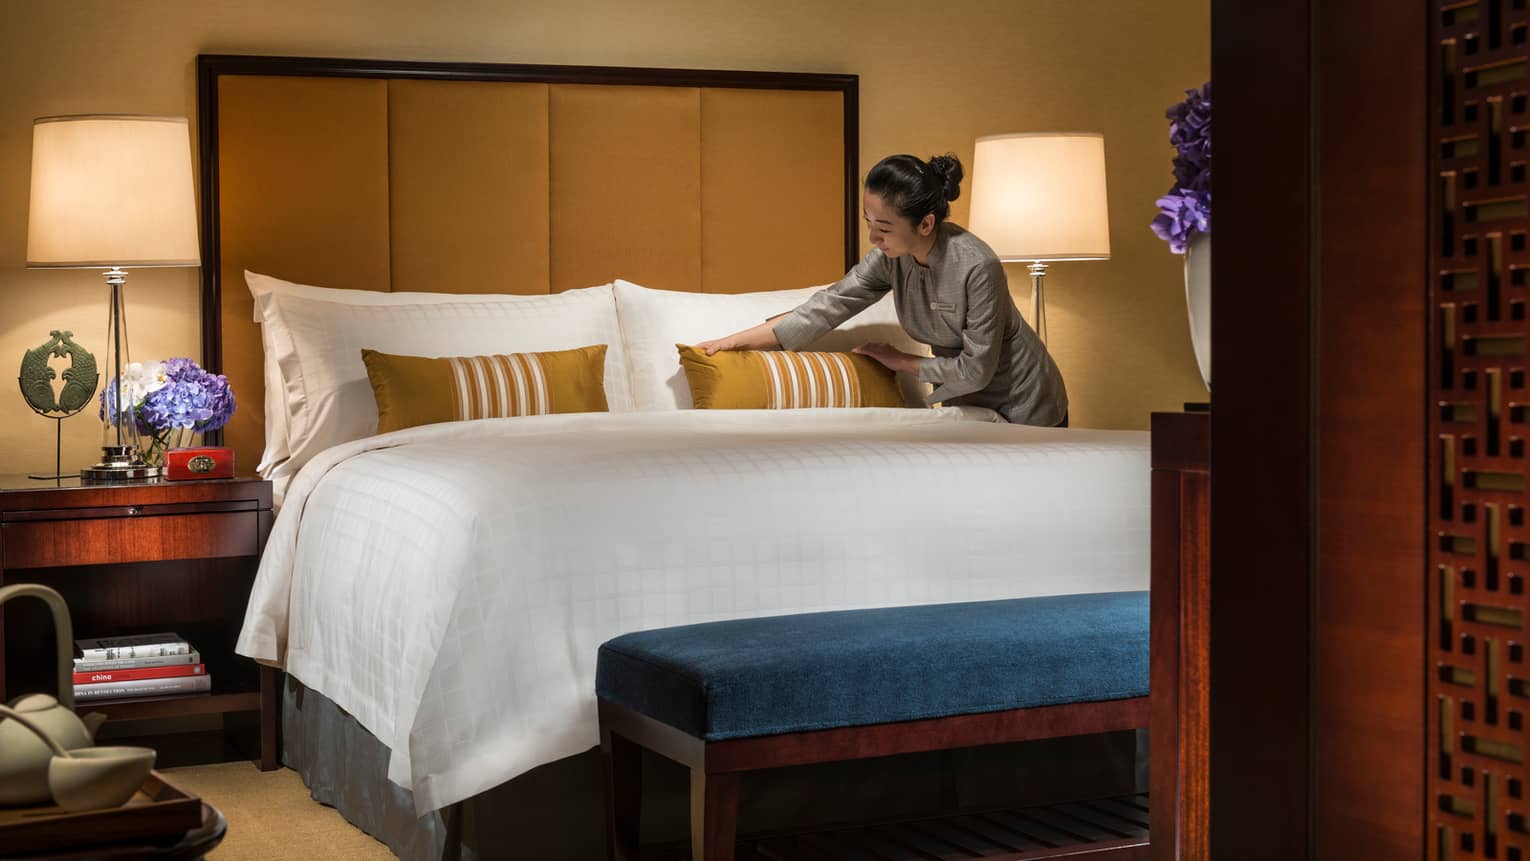 Hotel staff makes bed, adjusts gold accent pillow on white pillows, linens